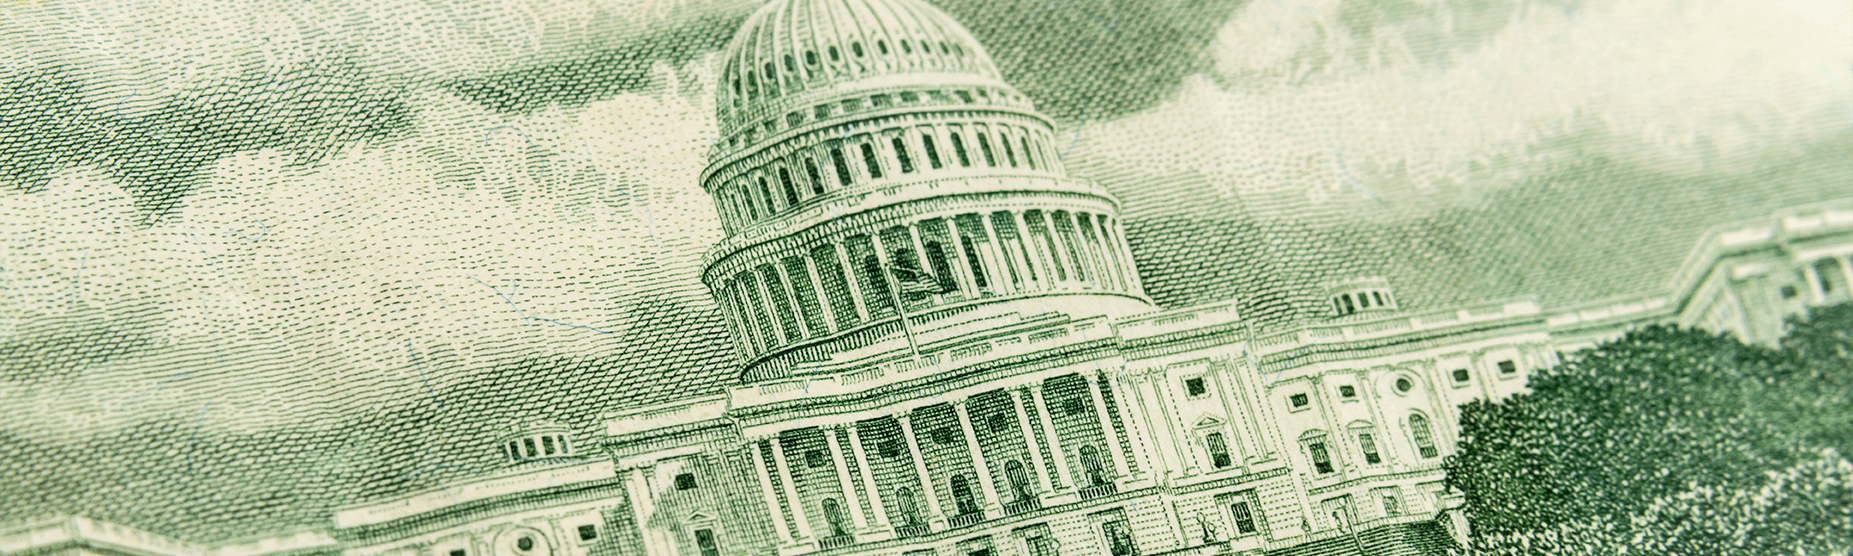 U.S. capitol building as seen on the back of United States money